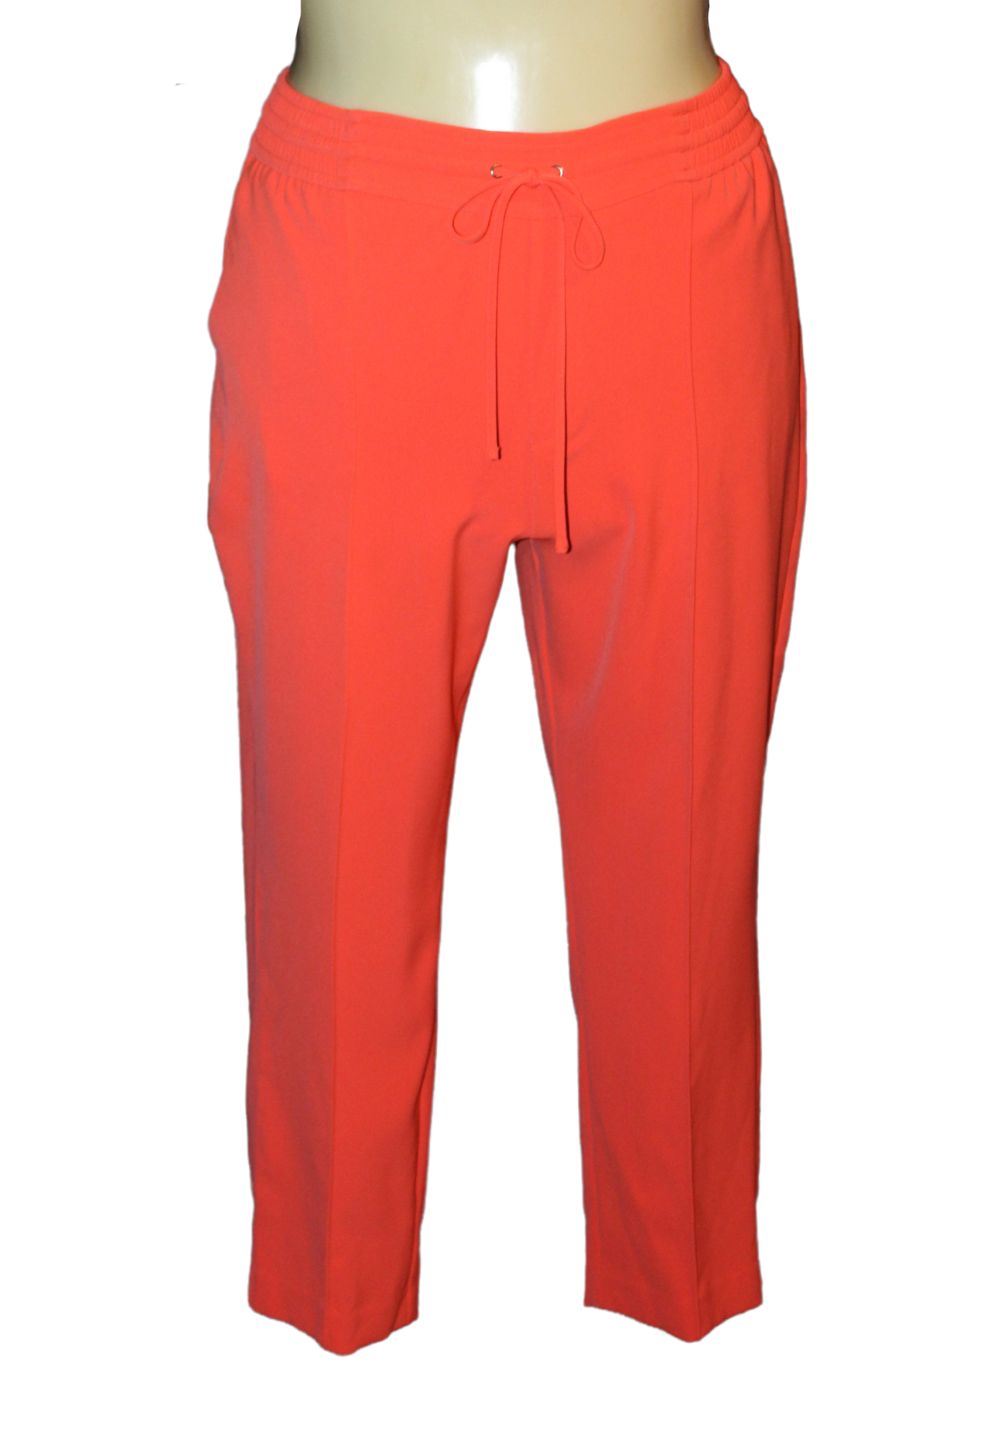 NWT Nine West Center Seam Coral Pants, Size 18